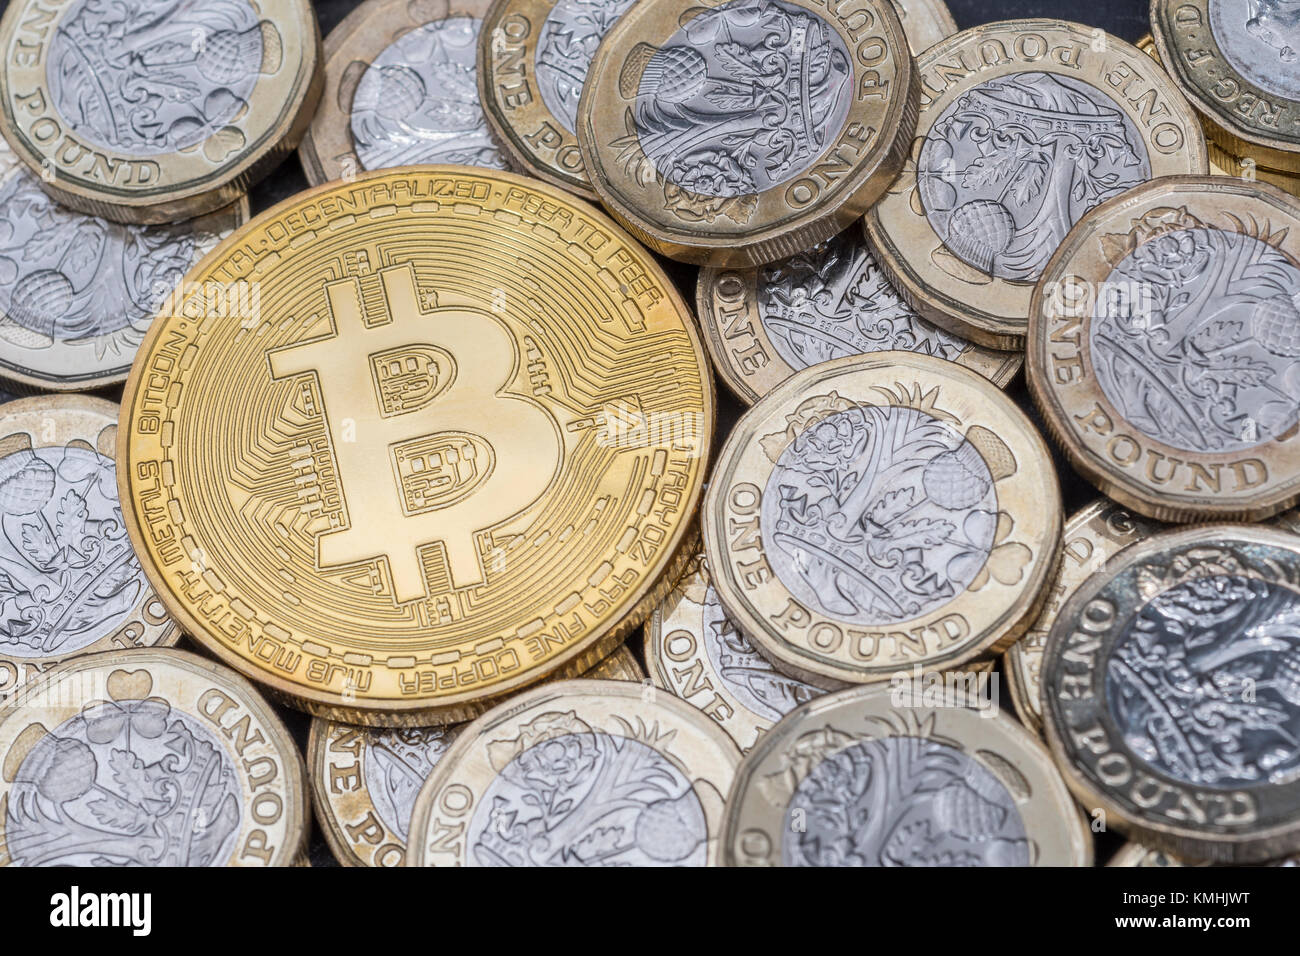 Gold colored Bitcoin and pound / £ coins - the peer-to-peer payment cryptocurrency reaching high levels in December 2017, 2020 Bitcoin crash. Stock Photo